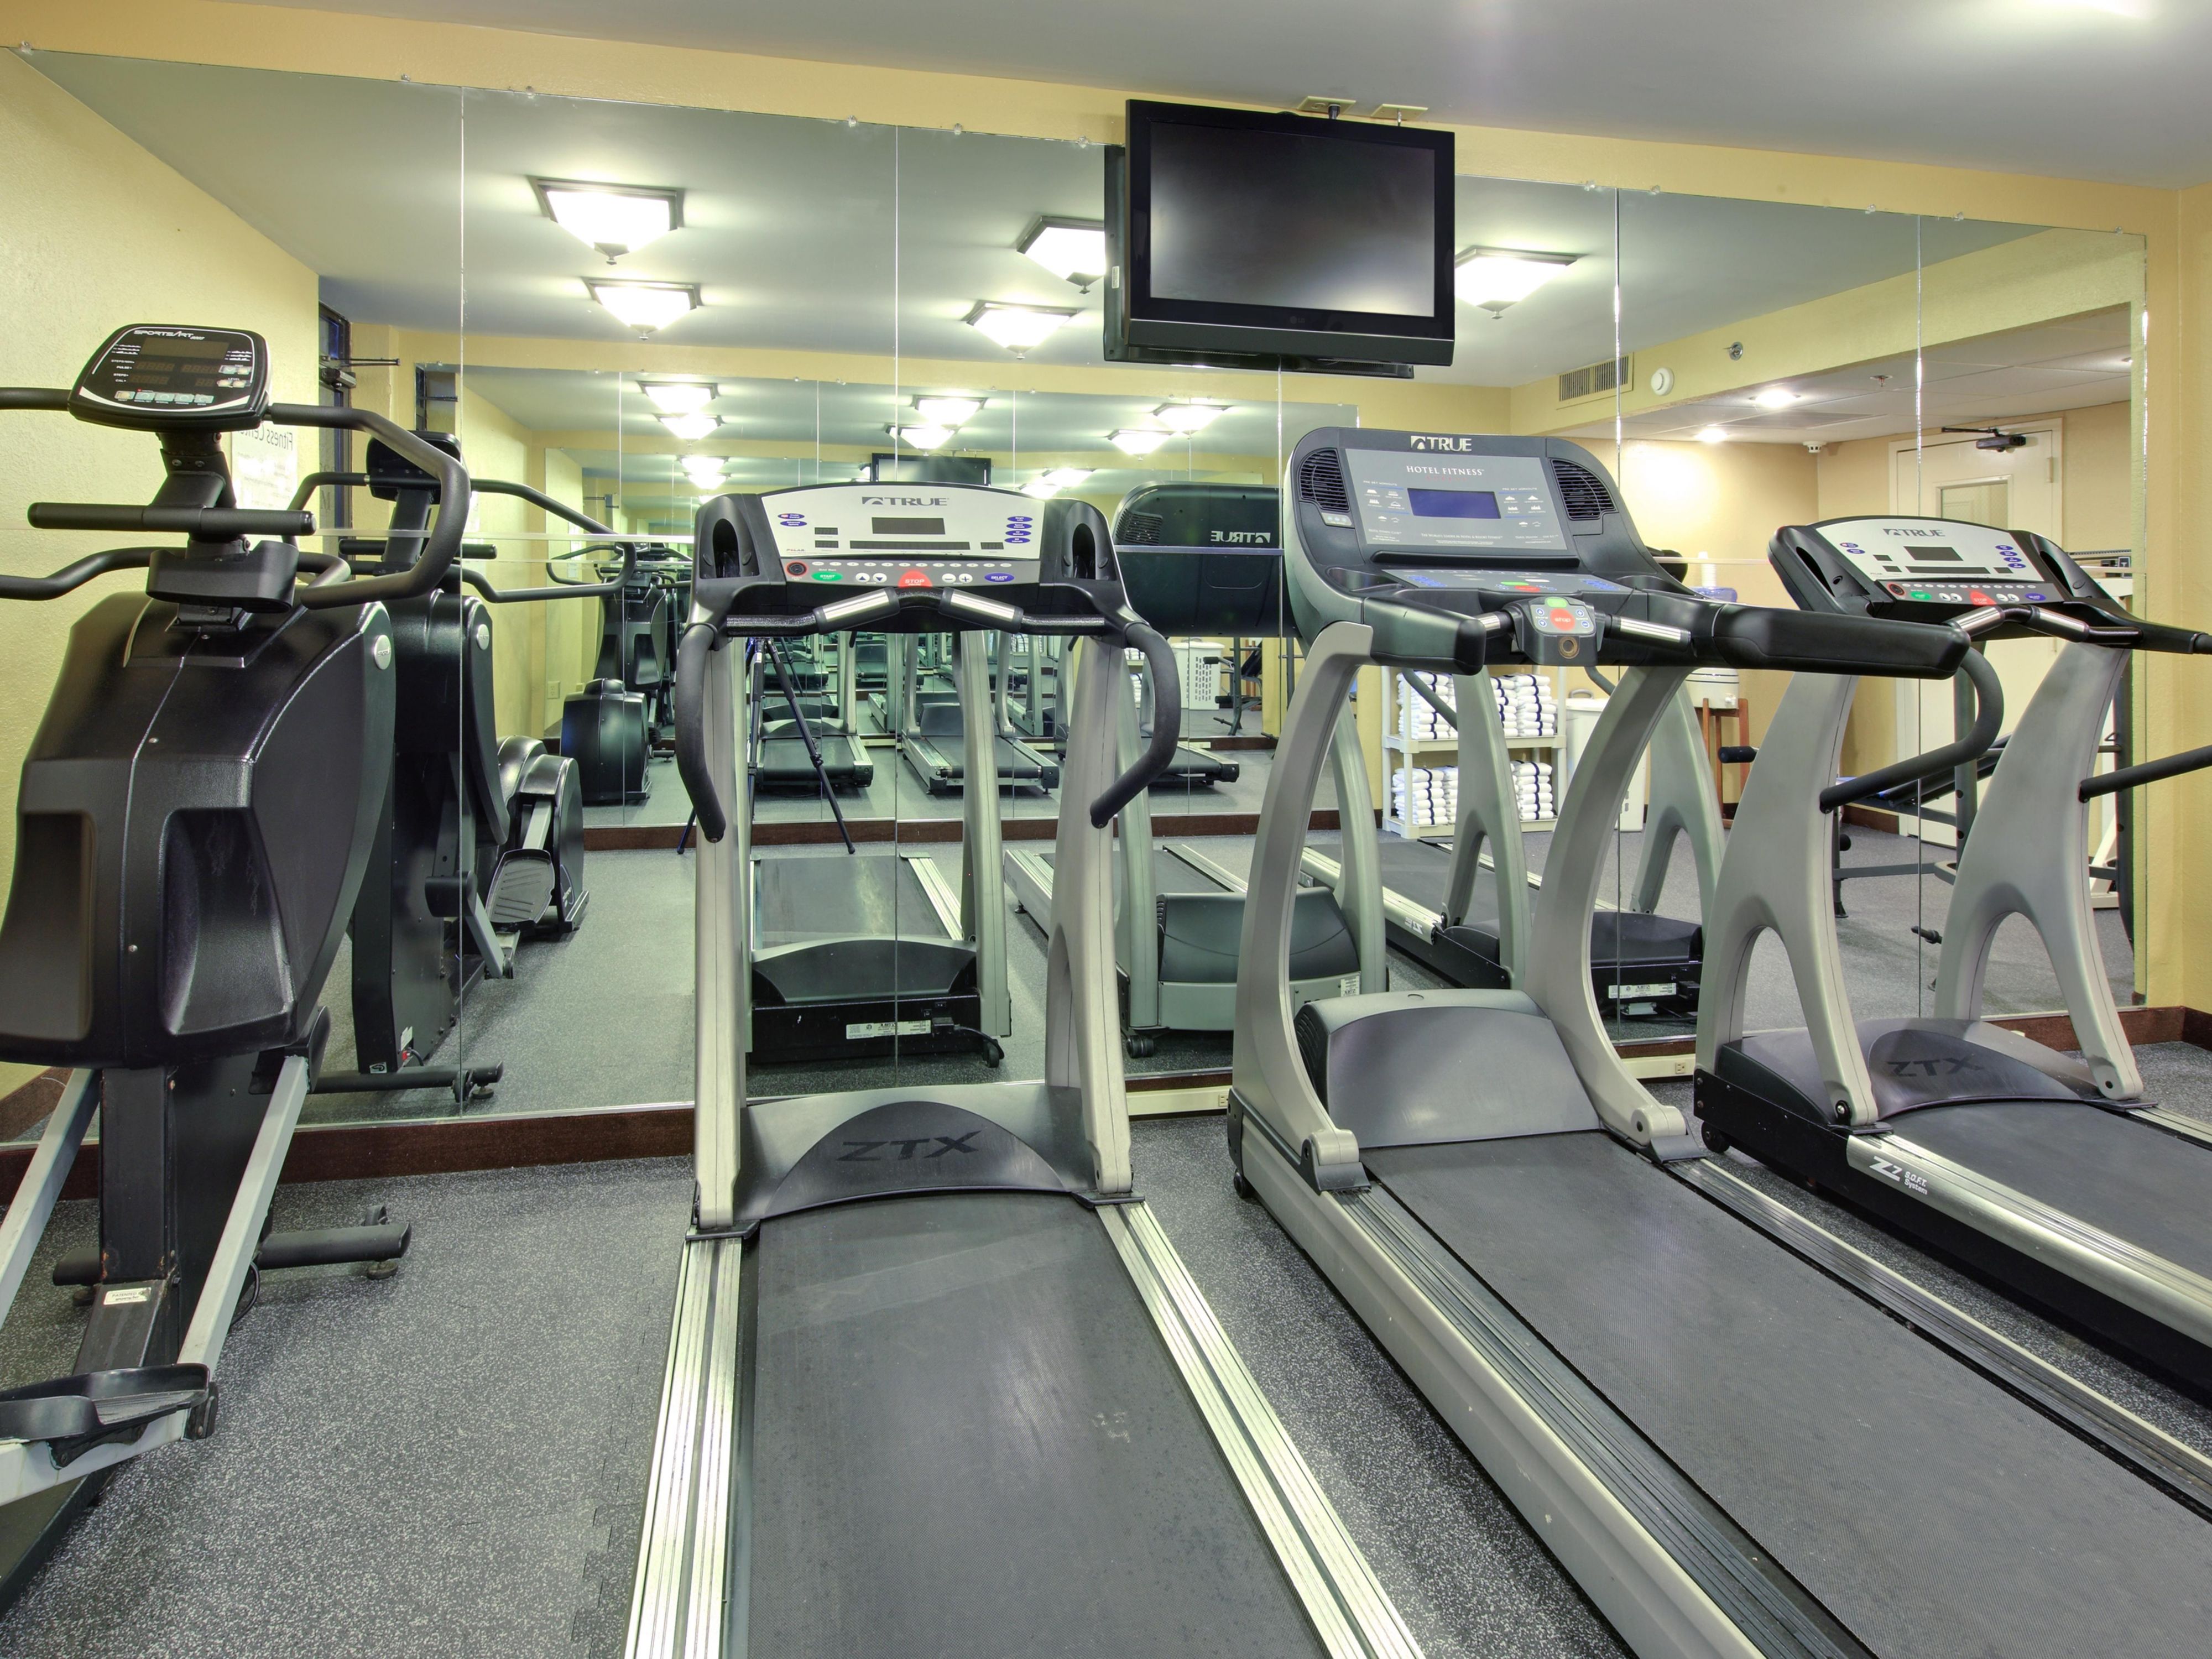 Get your sweat on in our complimentary, fully equipped fitness center- open all day and all night.
